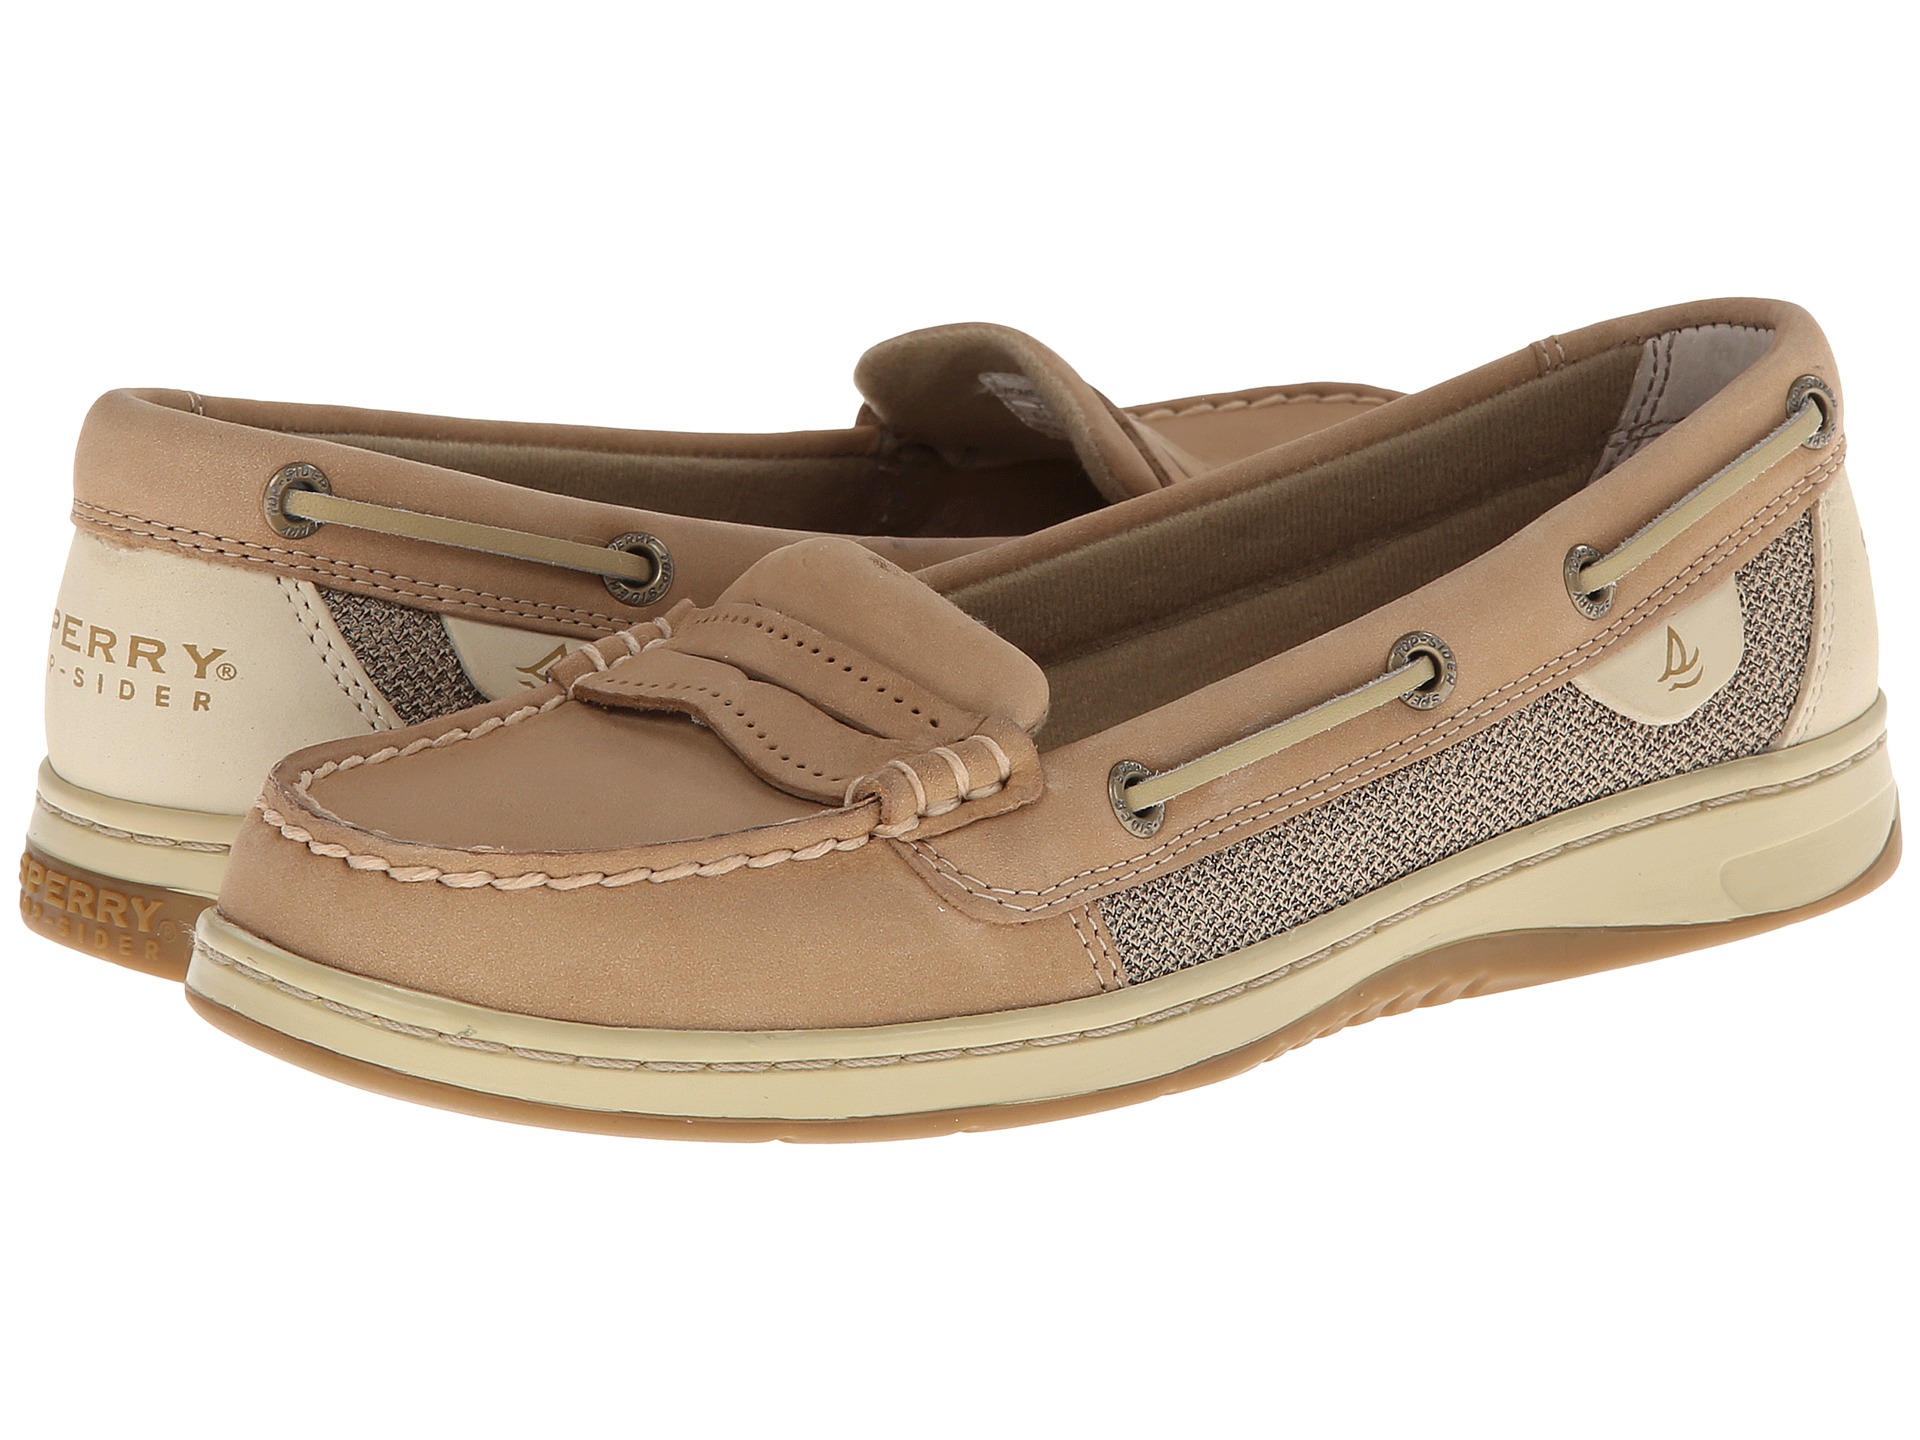 Sperry Top-Sider Pennyfish - Zappos Free Shipping BOTH Ways